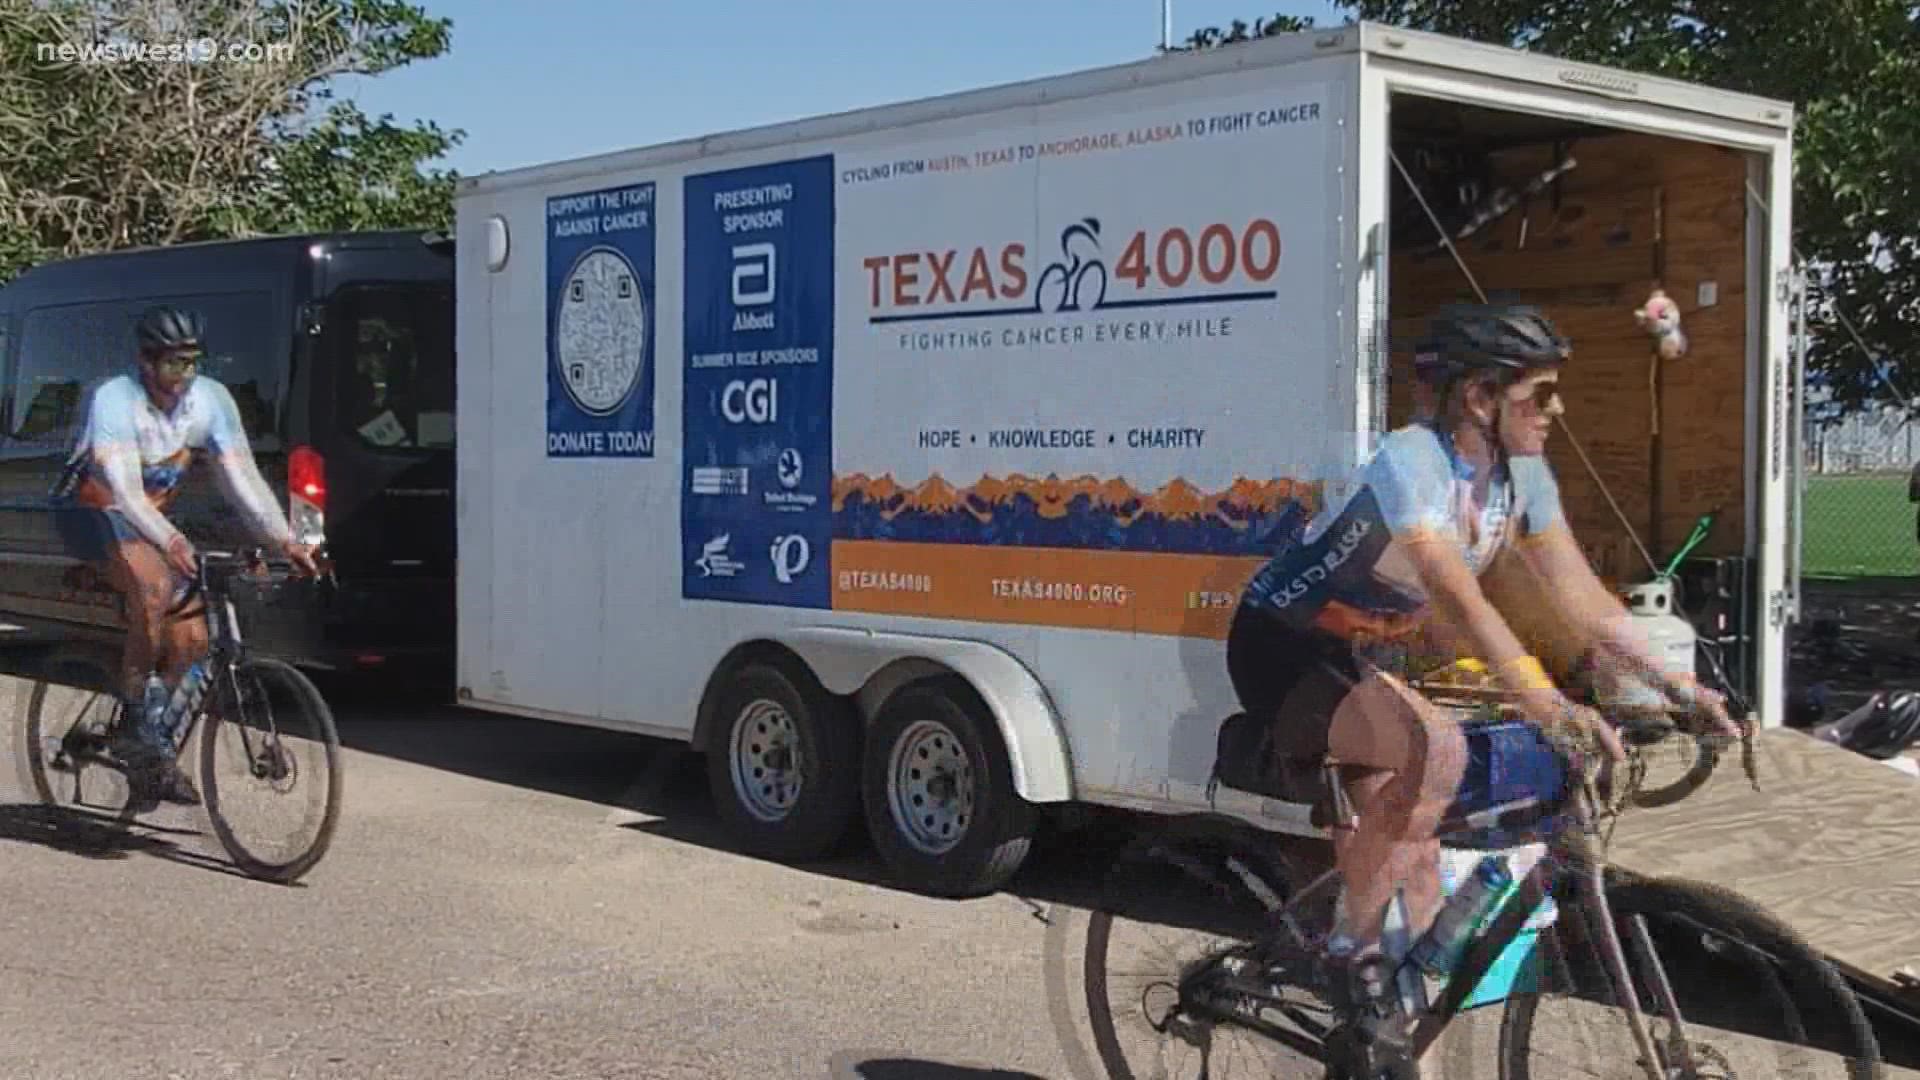 Texas 4000 stopped in Midland Tuesday to share their message of cancer awareness and prevention.